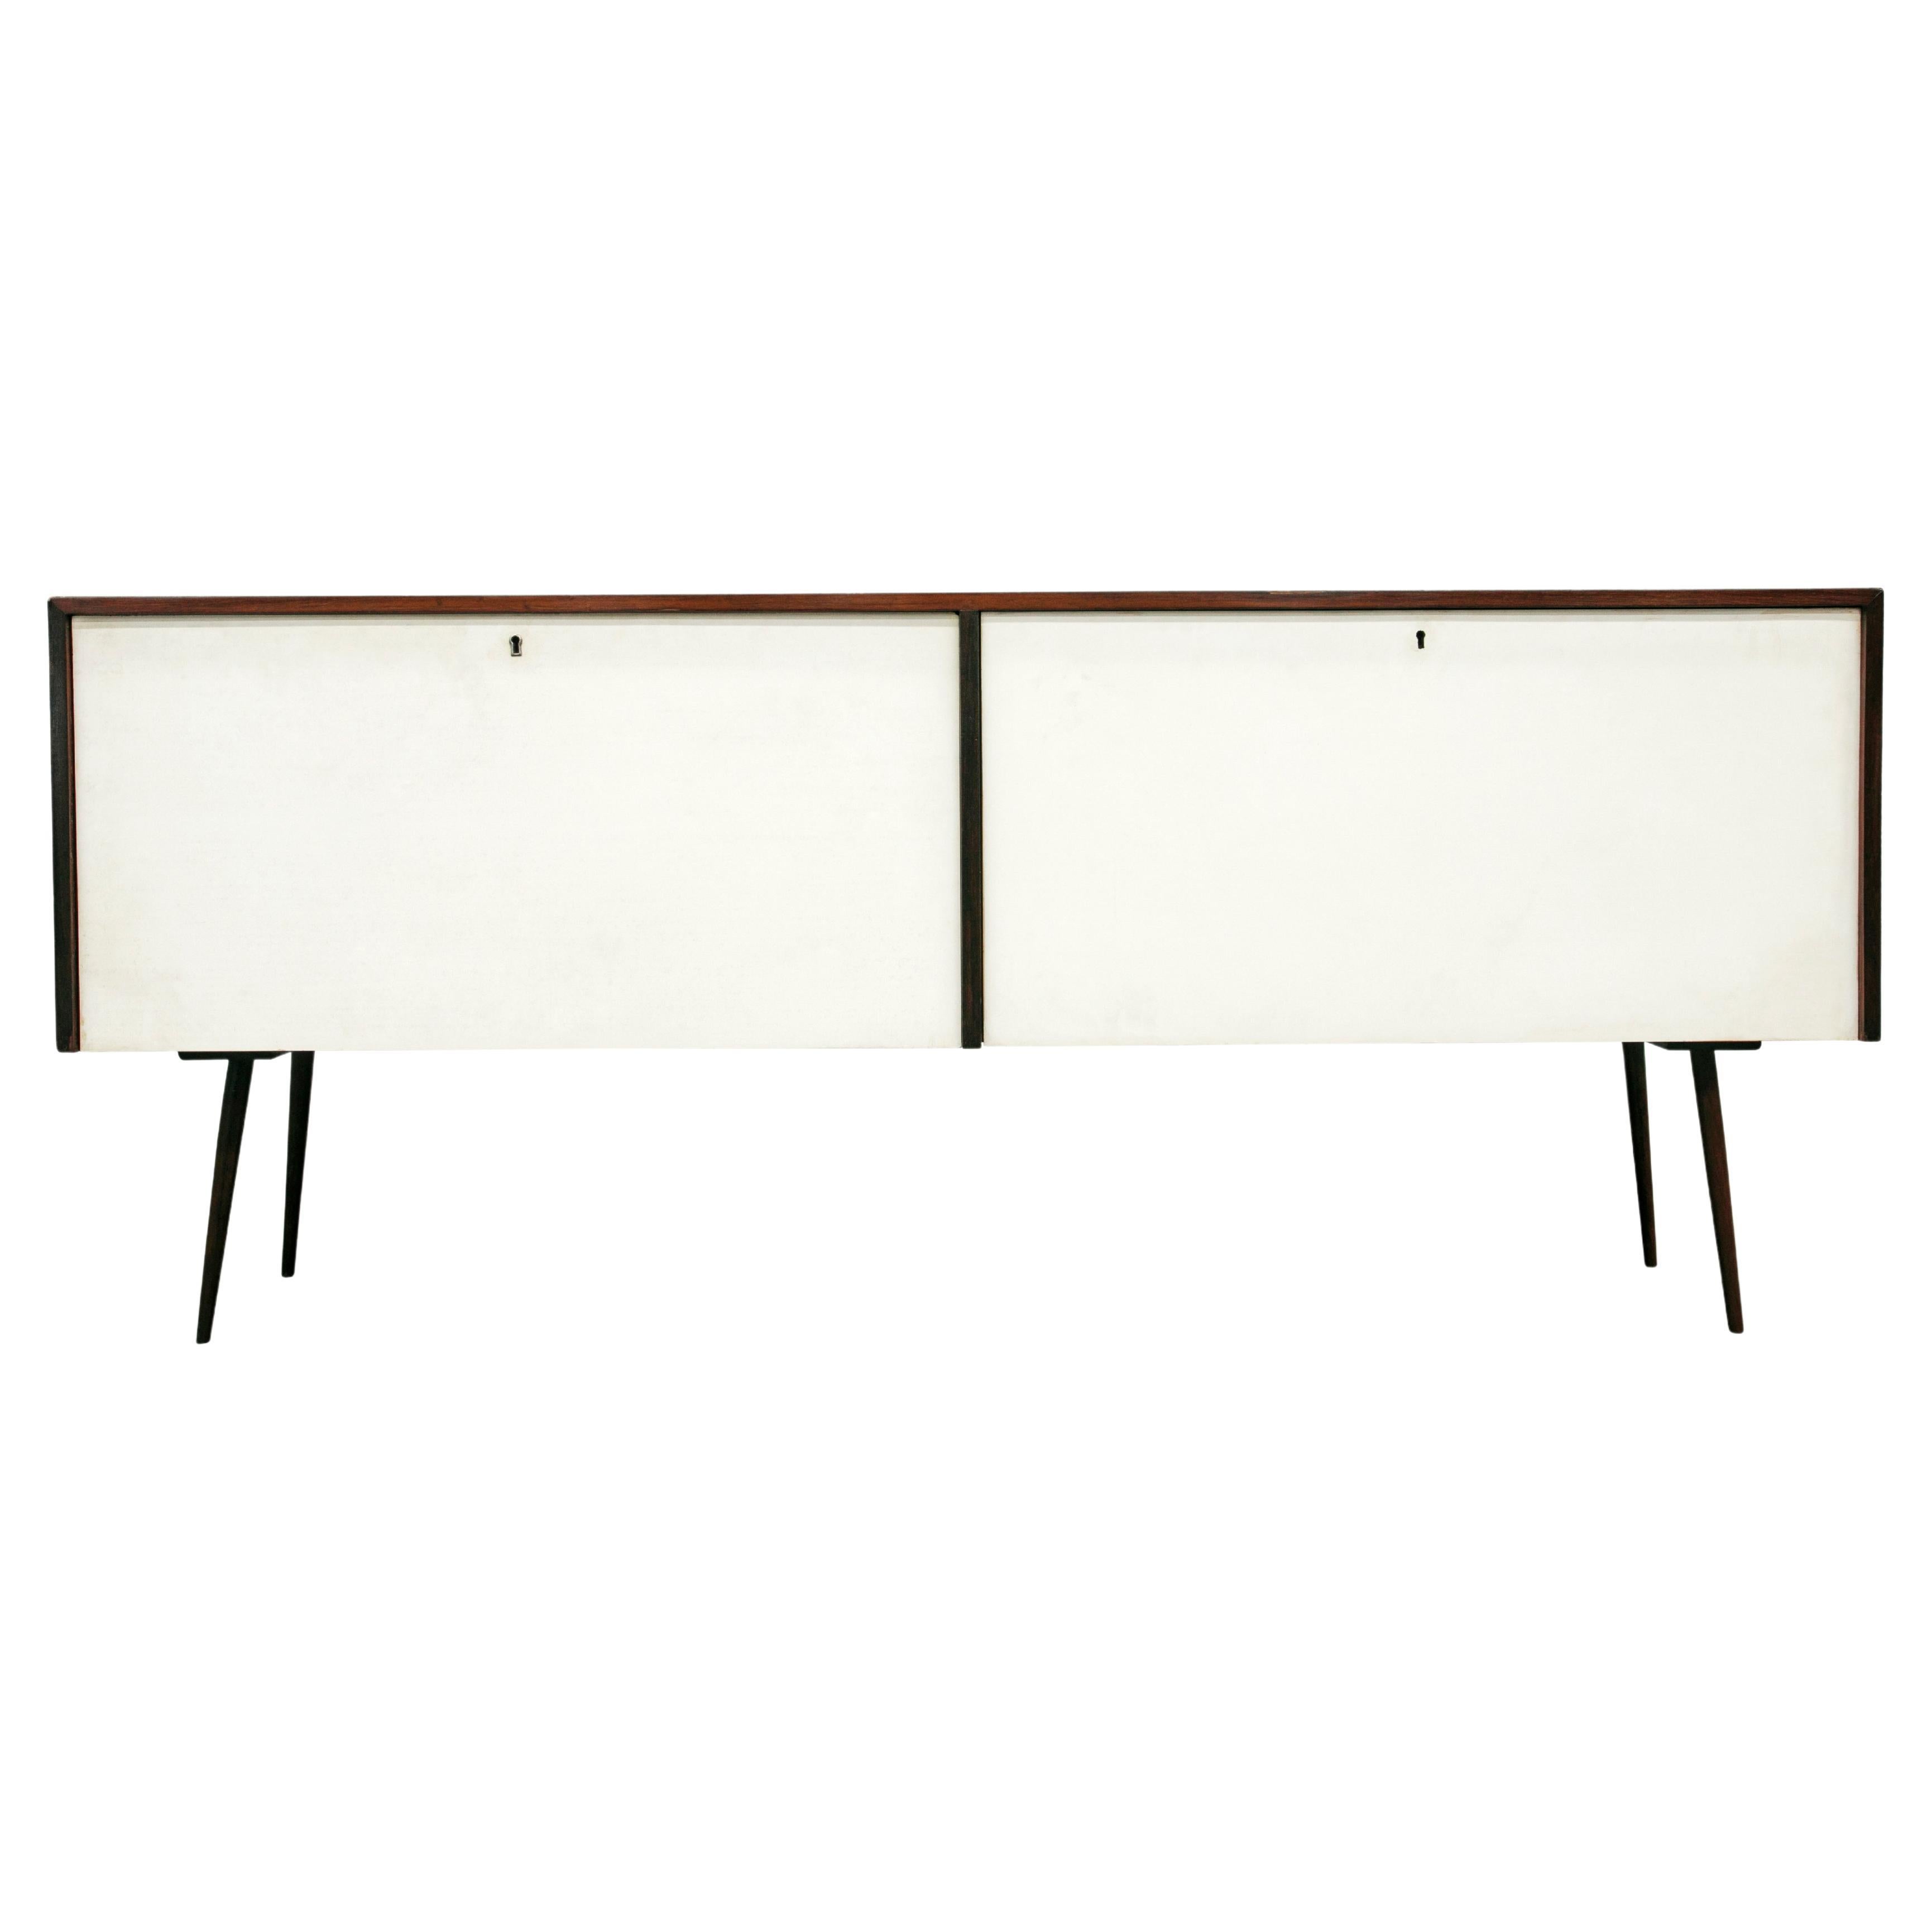 Brazilian Modern Bar in Rosewood and White Finish, by Forma, 1960s, Brazil For Sale